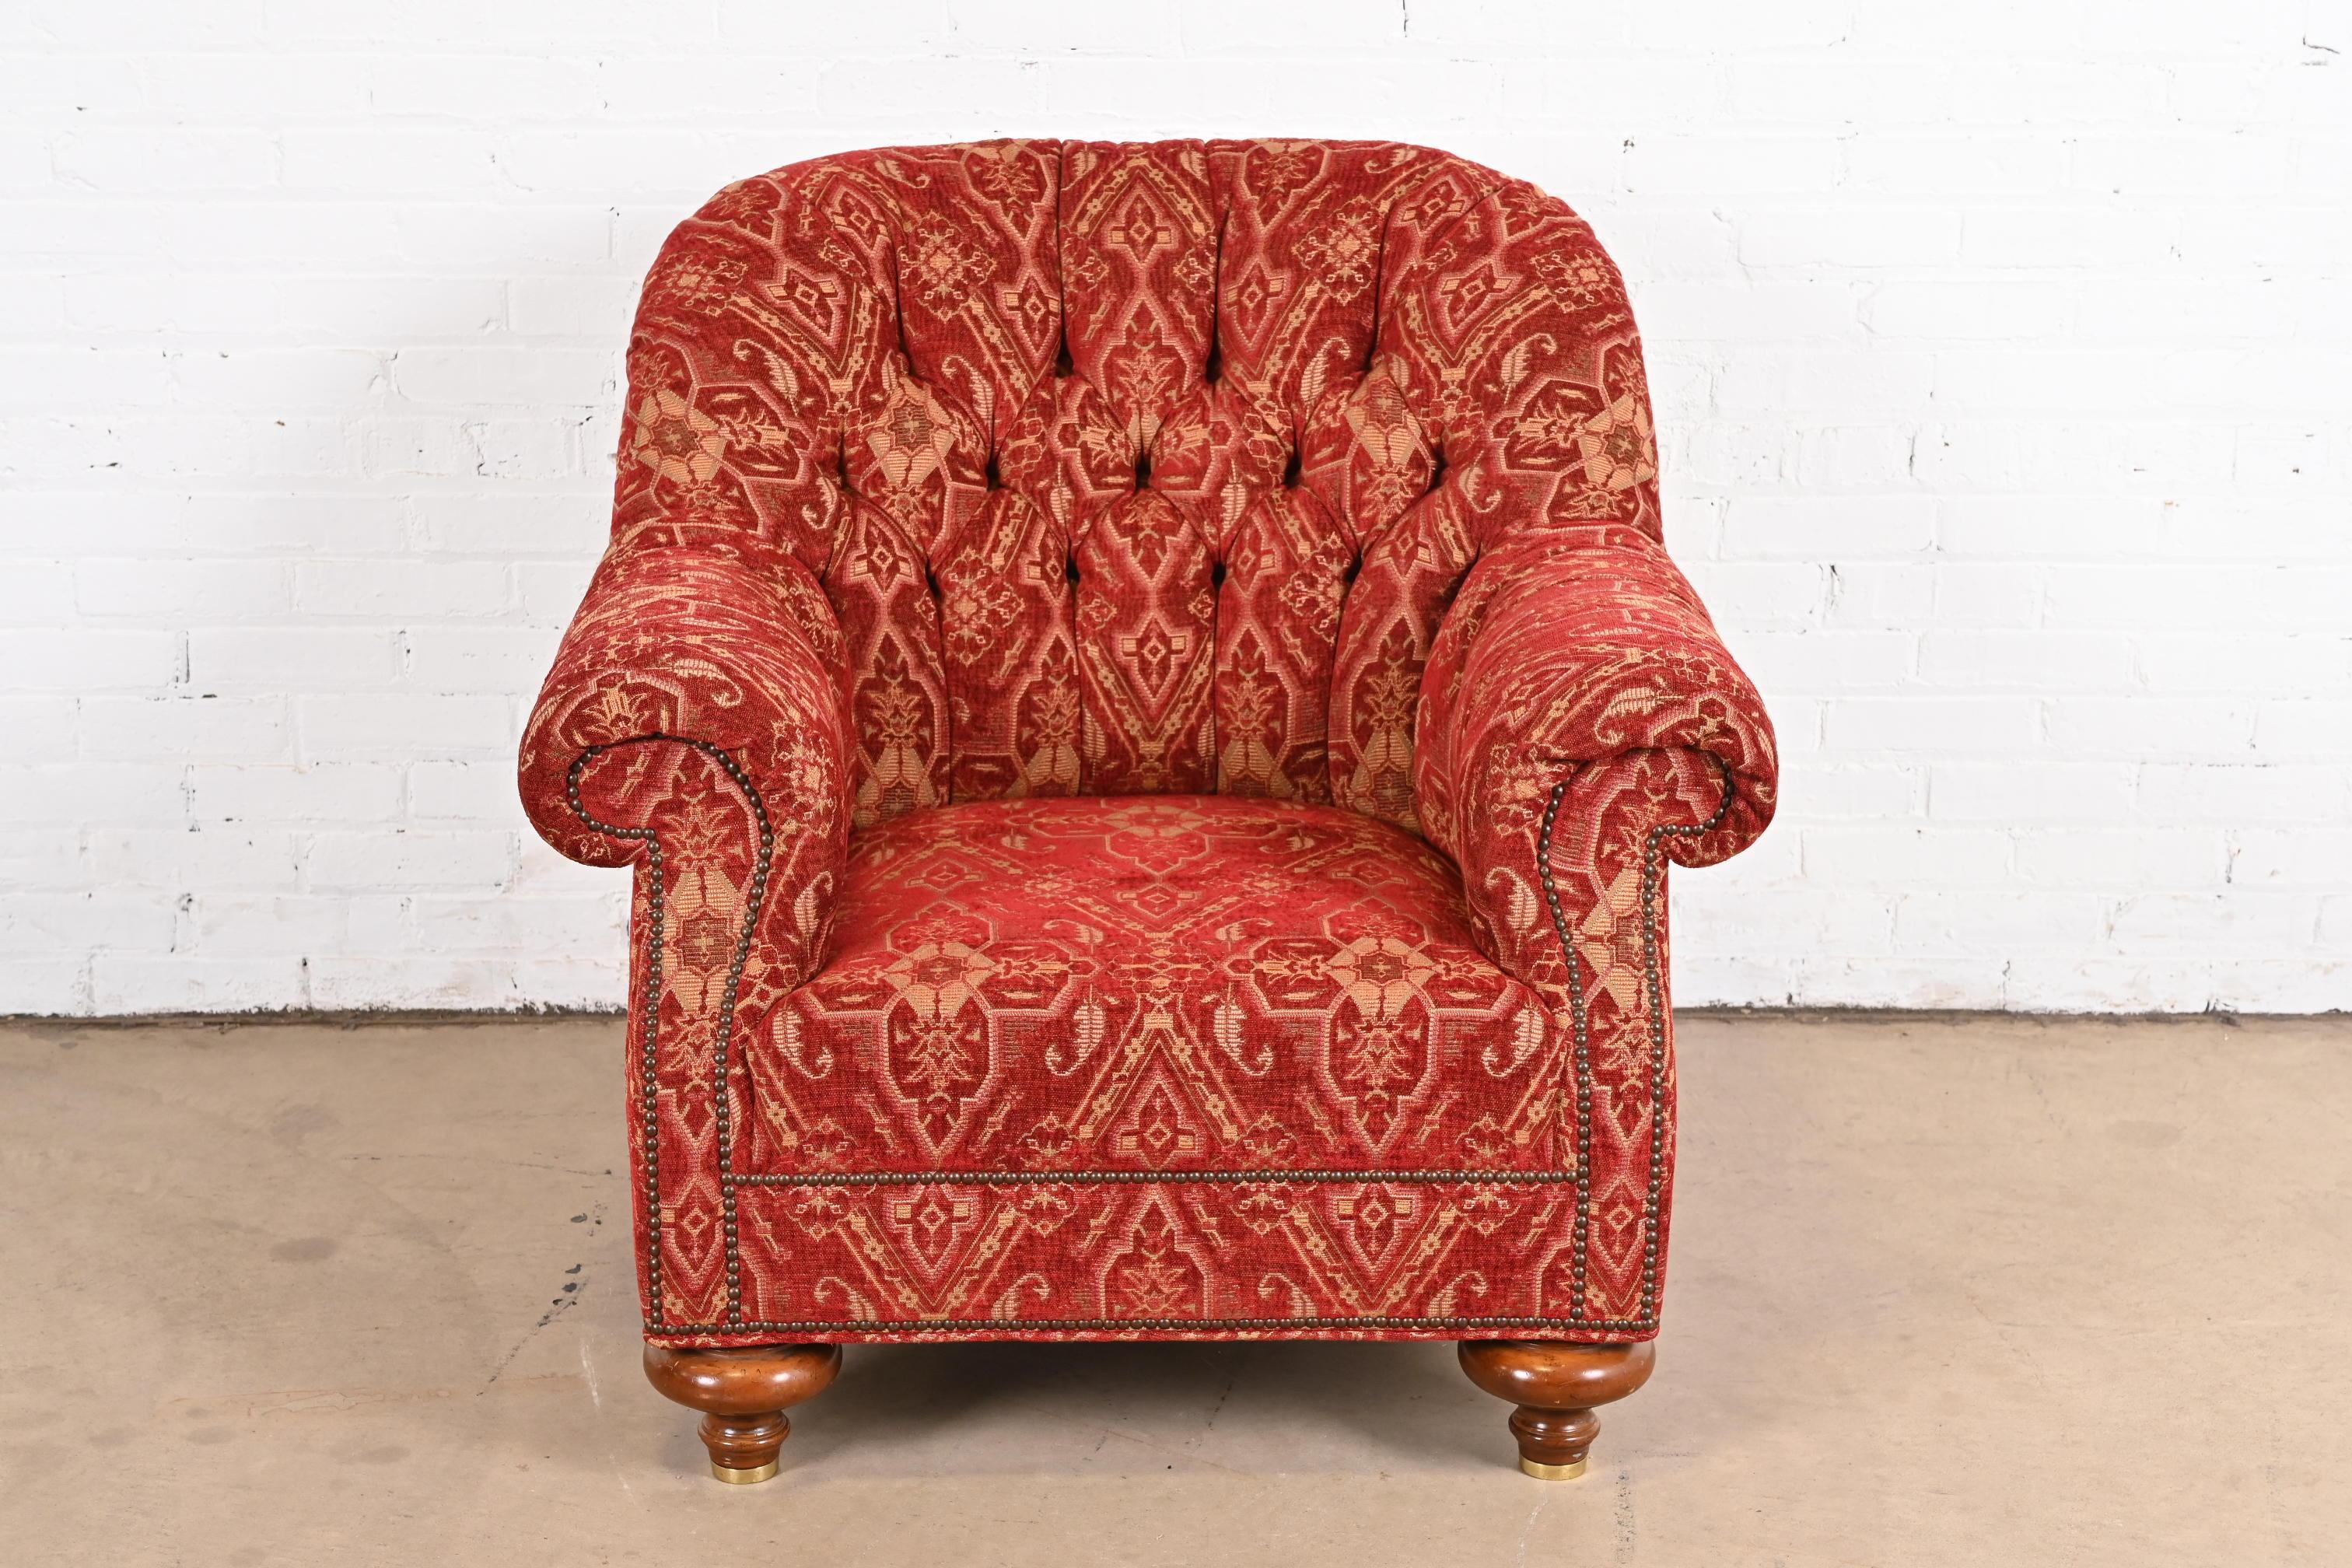 An outstanding late Victorian custom upholstered deep tufted club chair or tub chair with scrolled arms on turned bun feet

From the exclusive 